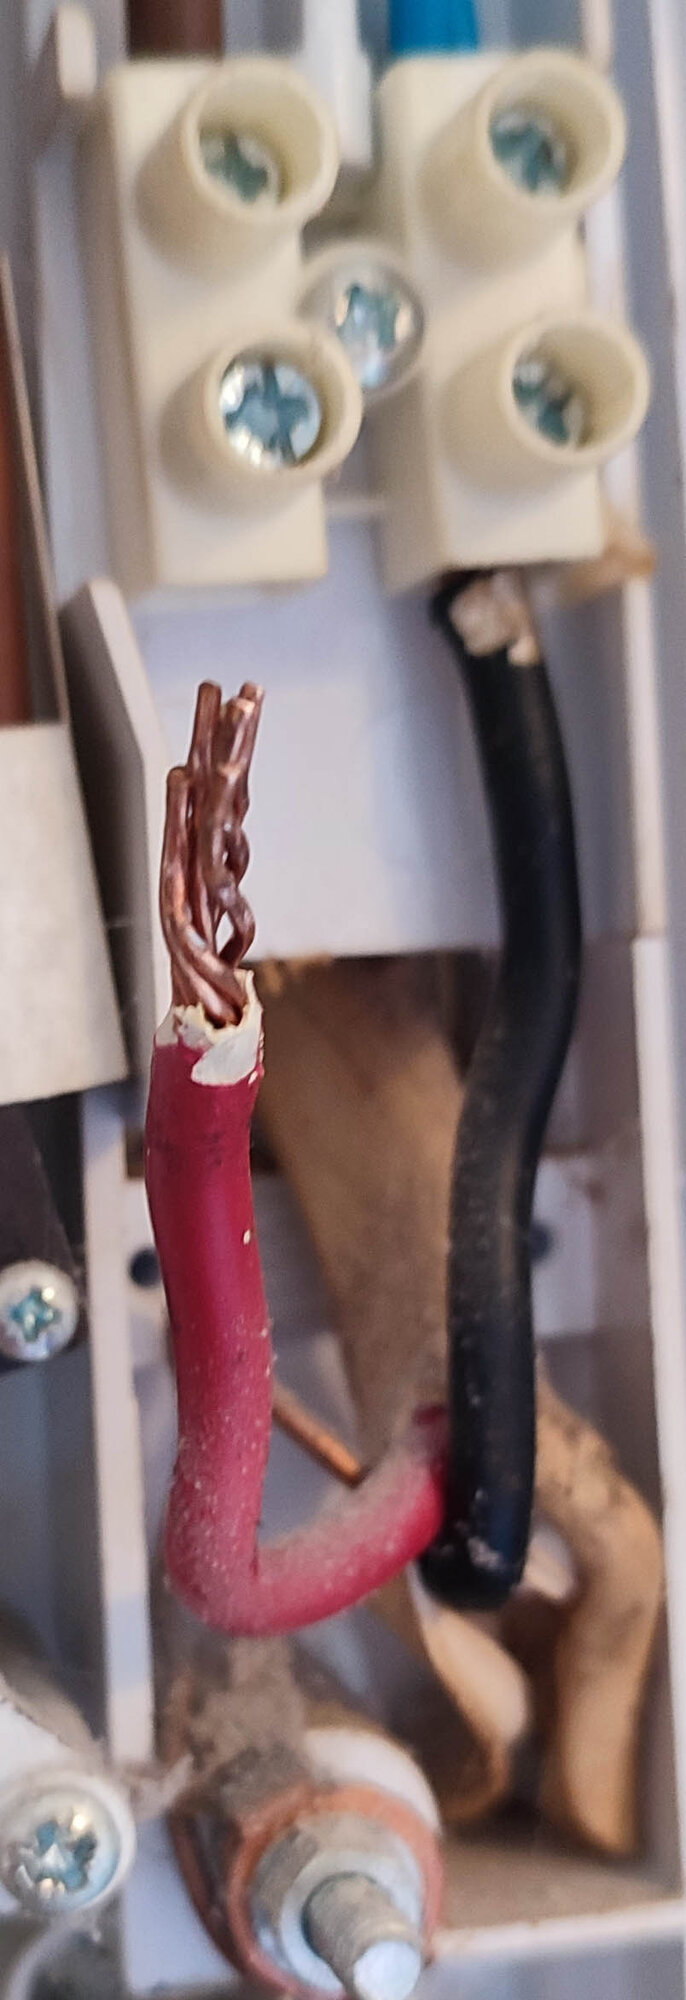 Power cable.jpg